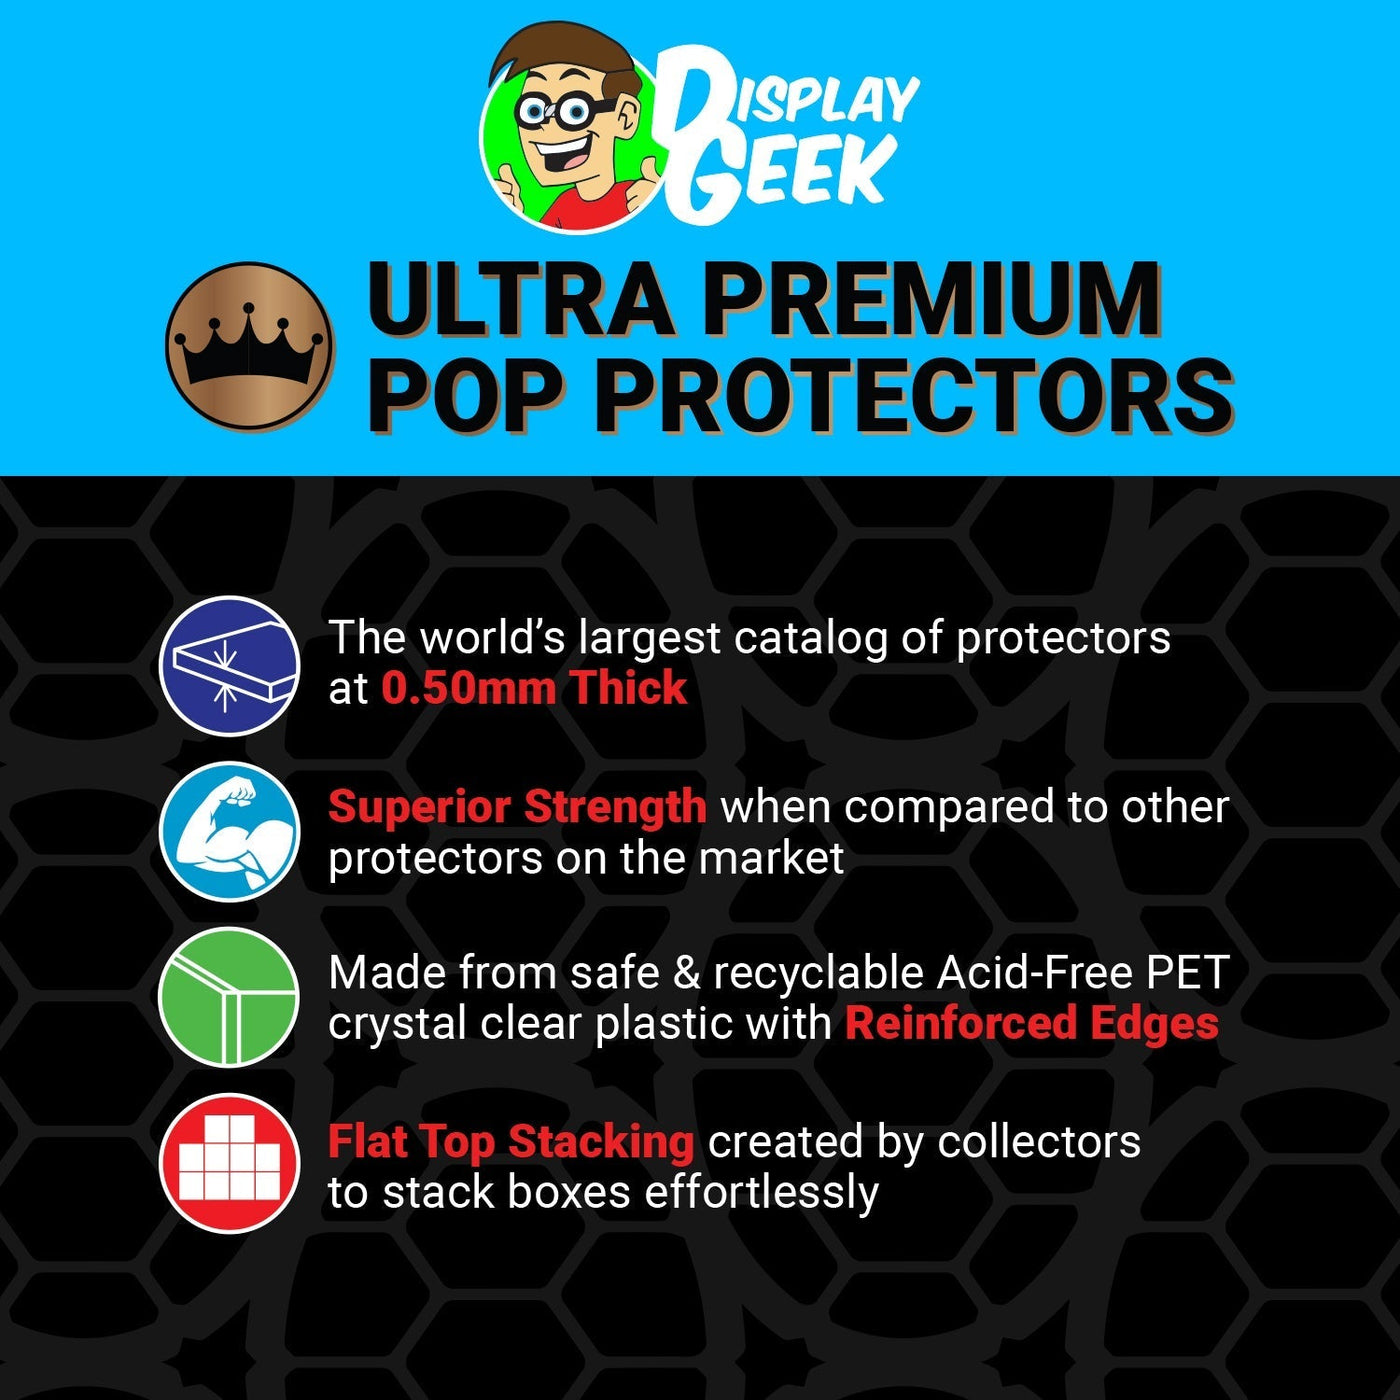 Pop Protector for 5 Pack McDonald's McNuggets Buddies Funko Pop on The Protector Guide App by Display Geek